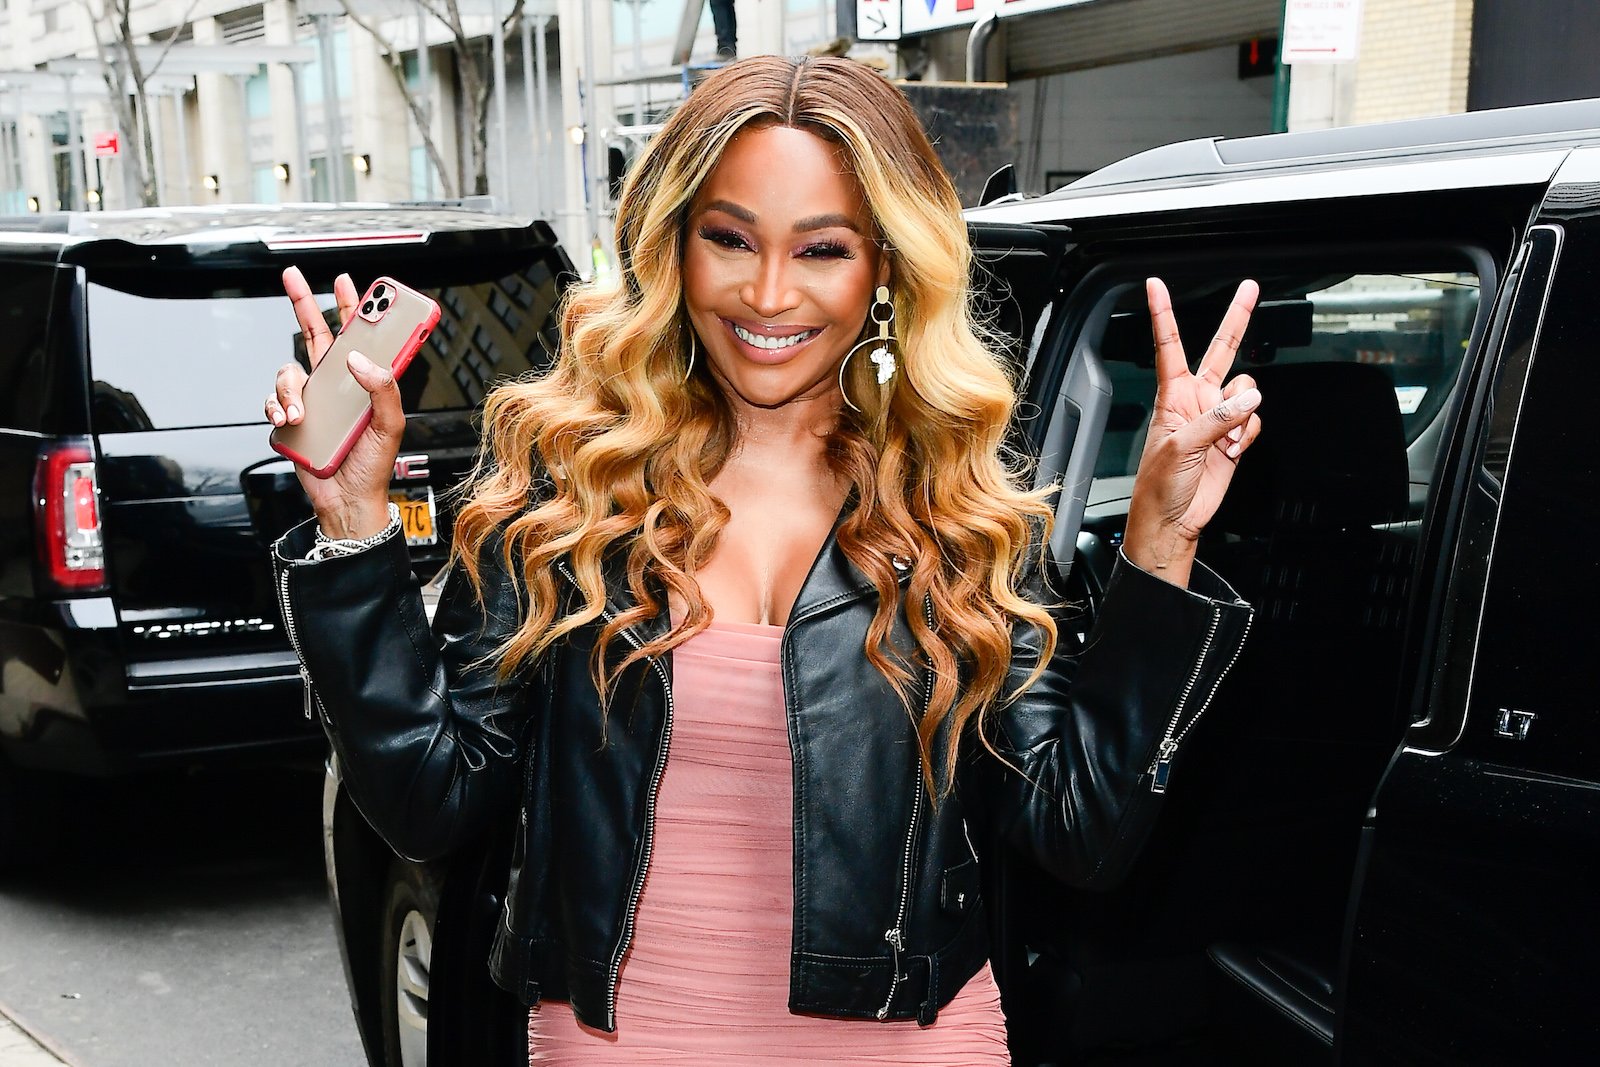 Cynthia Bailey from 'RHOA' flashes the peace sign to fans 